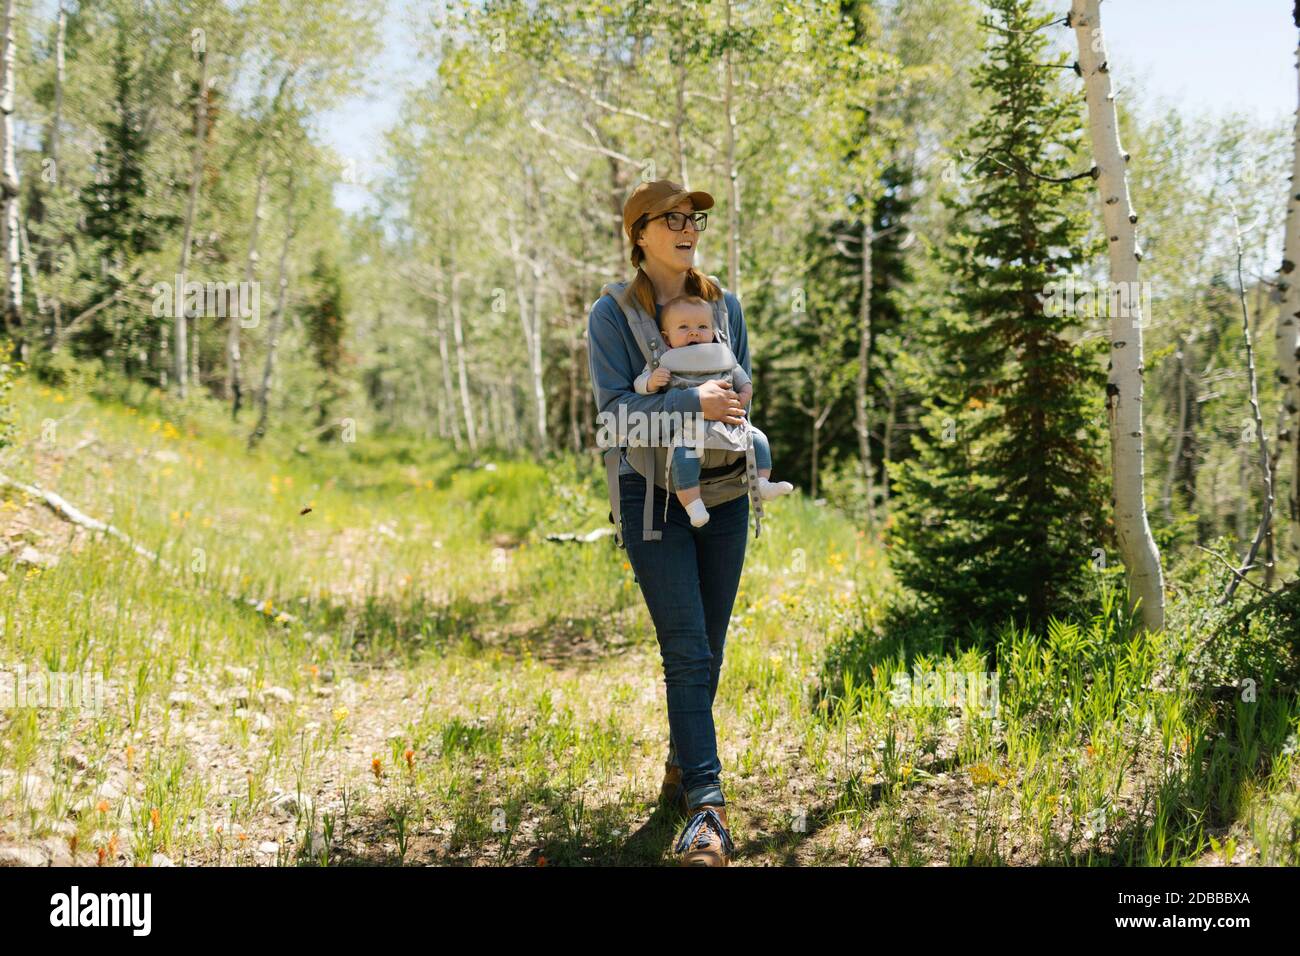 USA, Utah, Uinta National Park, Smiling woman with baby son (6-11 months) in baby carrier in forest Stock Photo